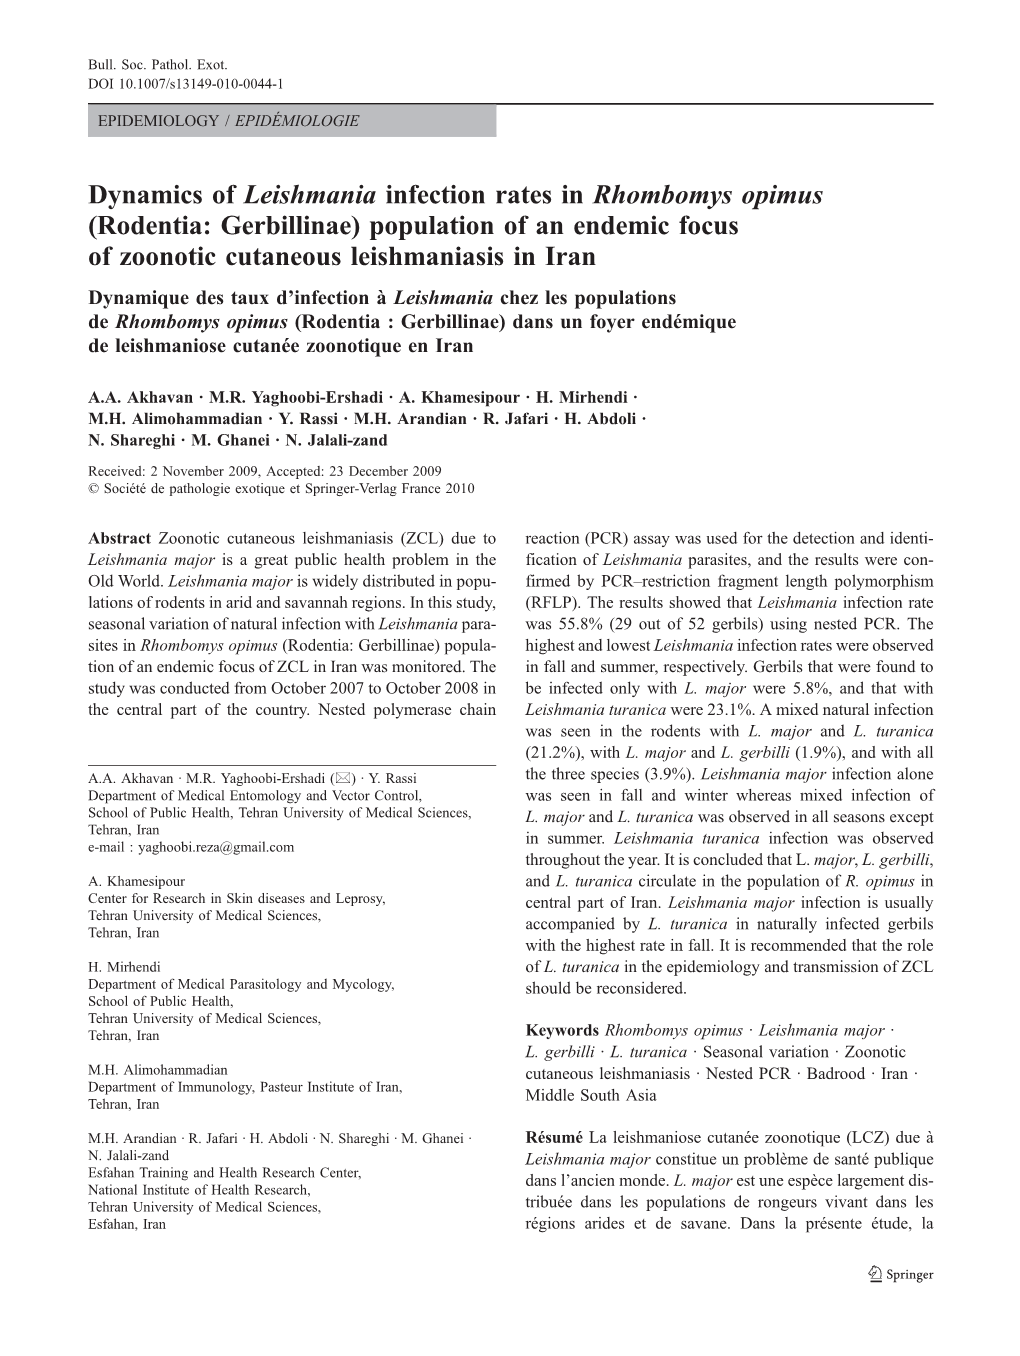 Dynamics of Leishmania Infection Rates in Rhombomys Opimus